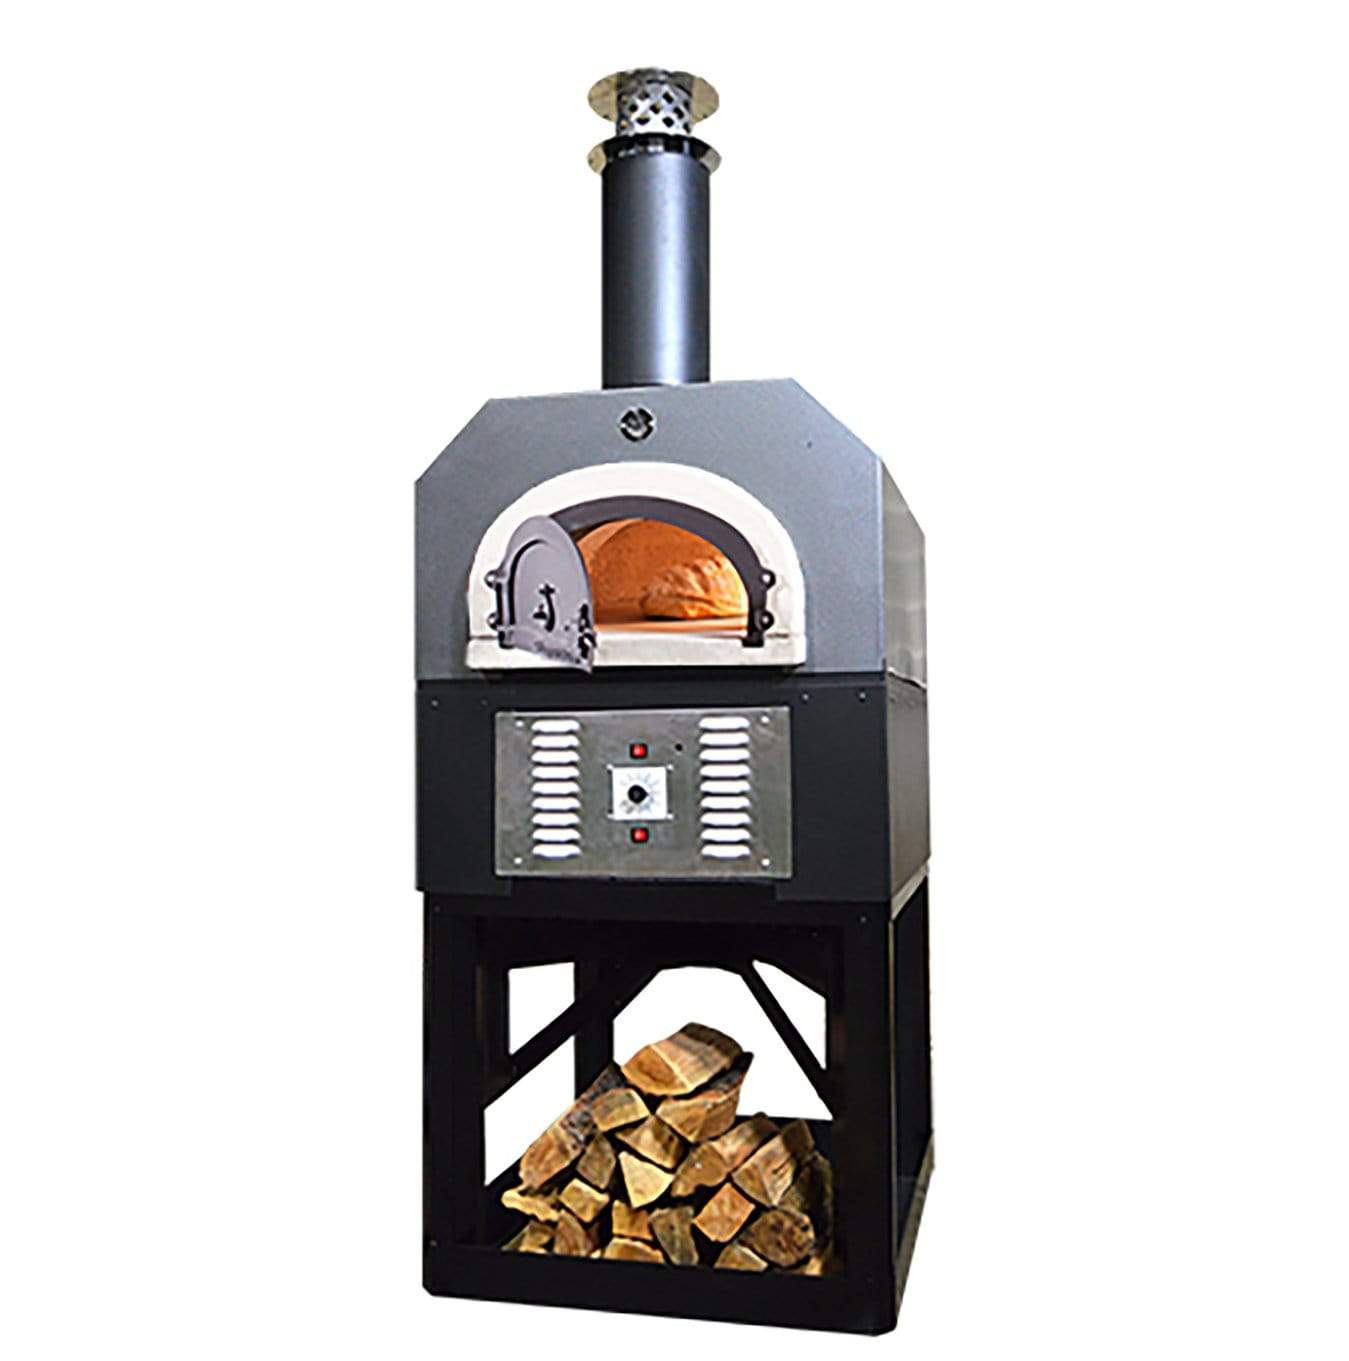 Chicago Brick Oven Pizza Ovens Chicago Brick Oven Dual Fuel Pizza Oven / CBO-750 on Stand / Hybrid (Gas/Wood) / CBO-O-STD-750-HYB